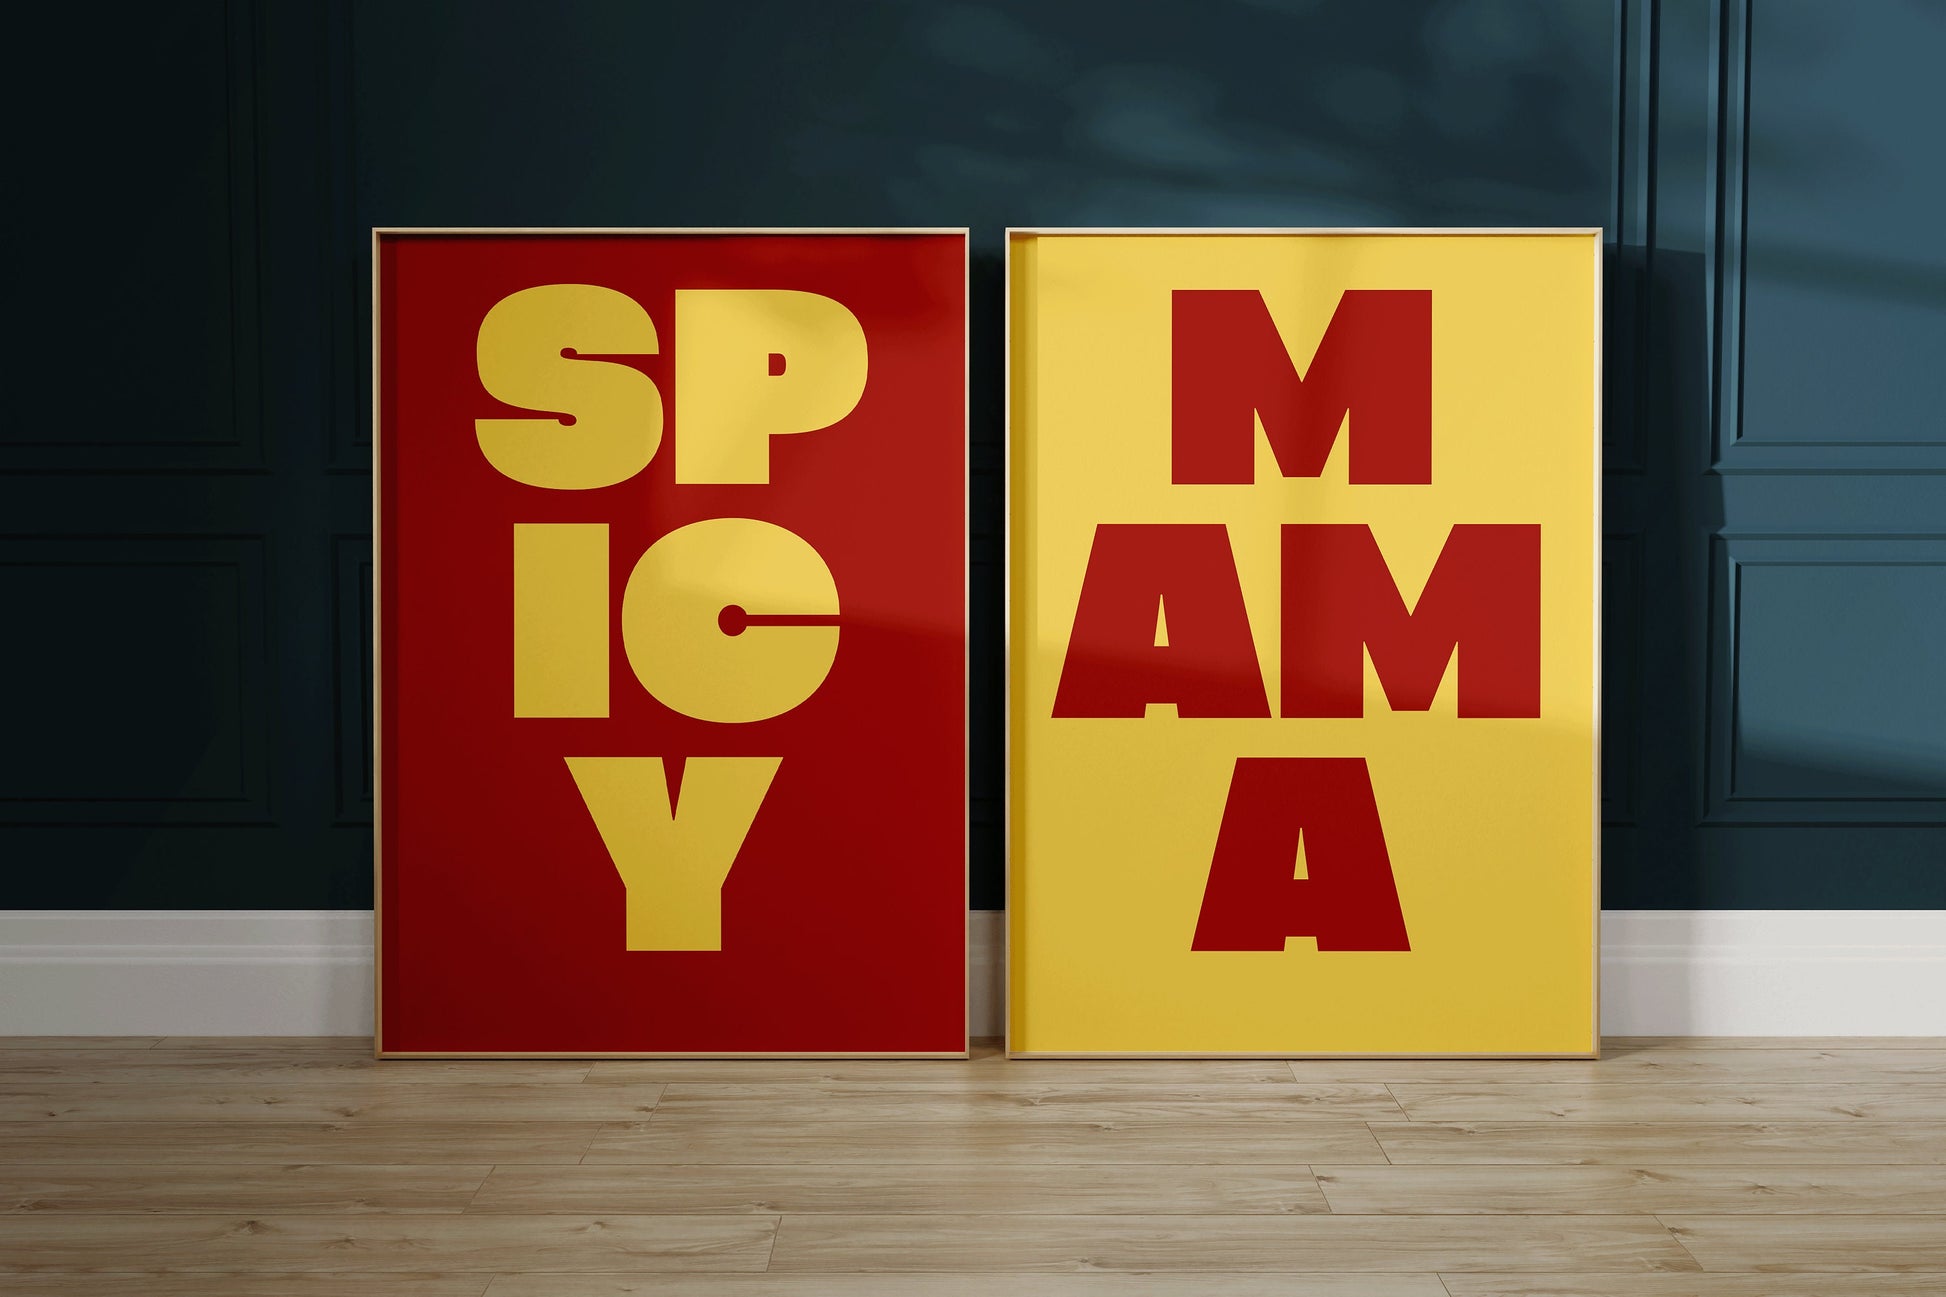 Set of 2 Typography Poster SPICY MAMA Kitchen Poster Graphic Design Print Art Home Decor Minimalist Framed Ready to Hang Red and Yellow Gift